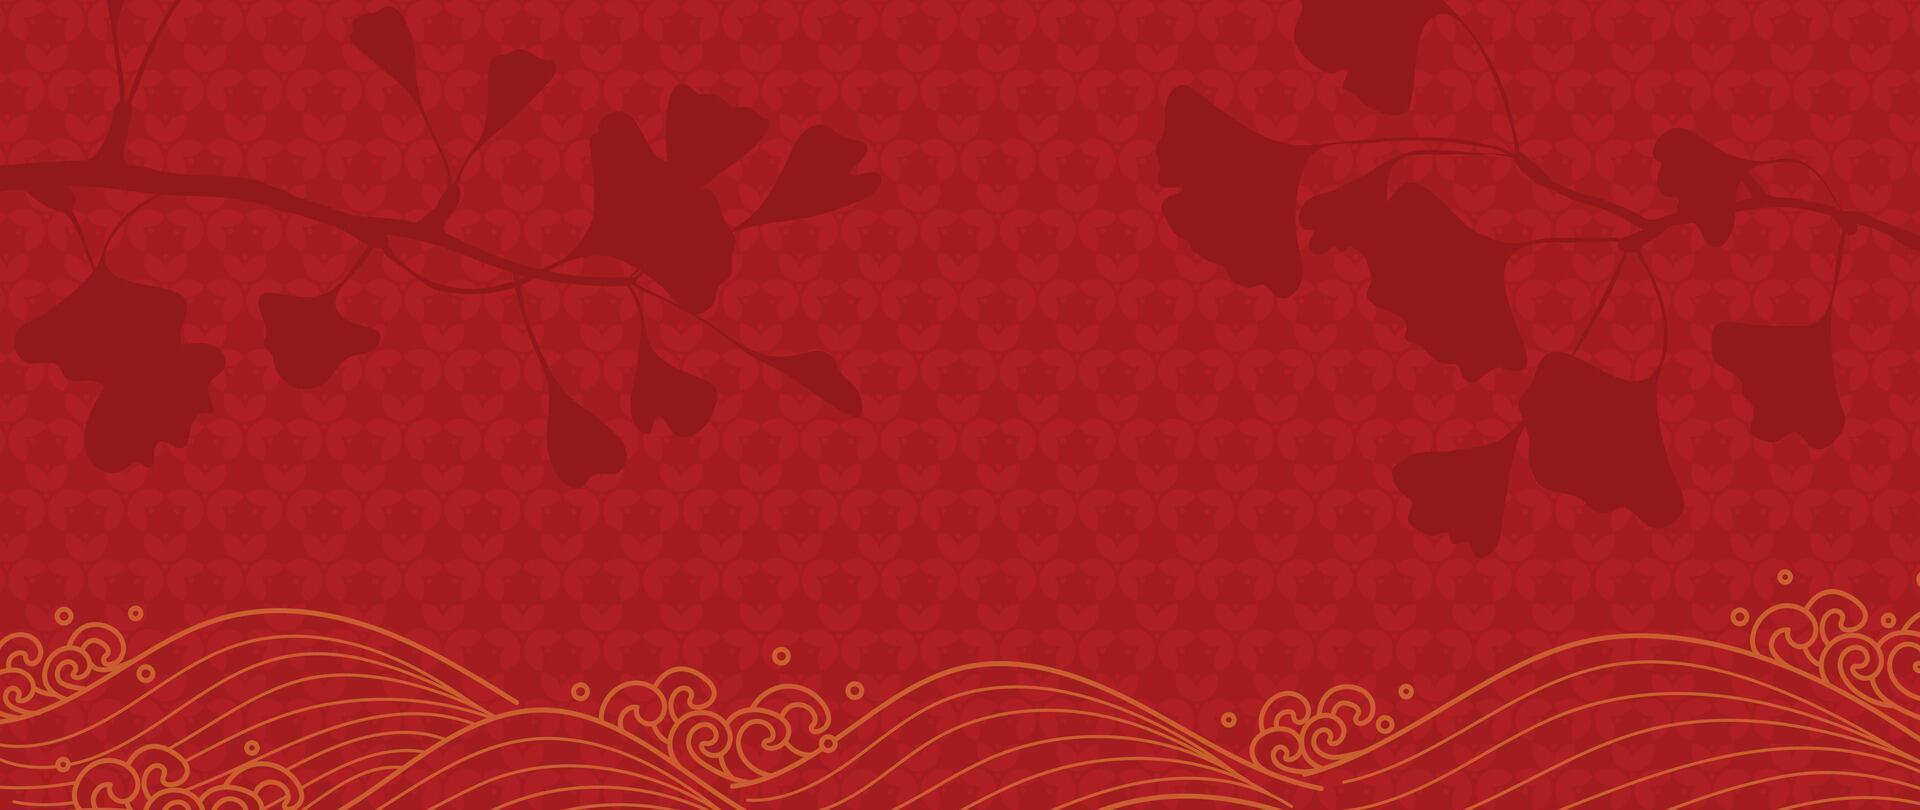 Happy Chinese new year background . Luxury wallpaper design with chinese pattern, ginkgo leaf, sea wave on red background. Modern luxury oriental illustration for cover, banner, website, decor. vector